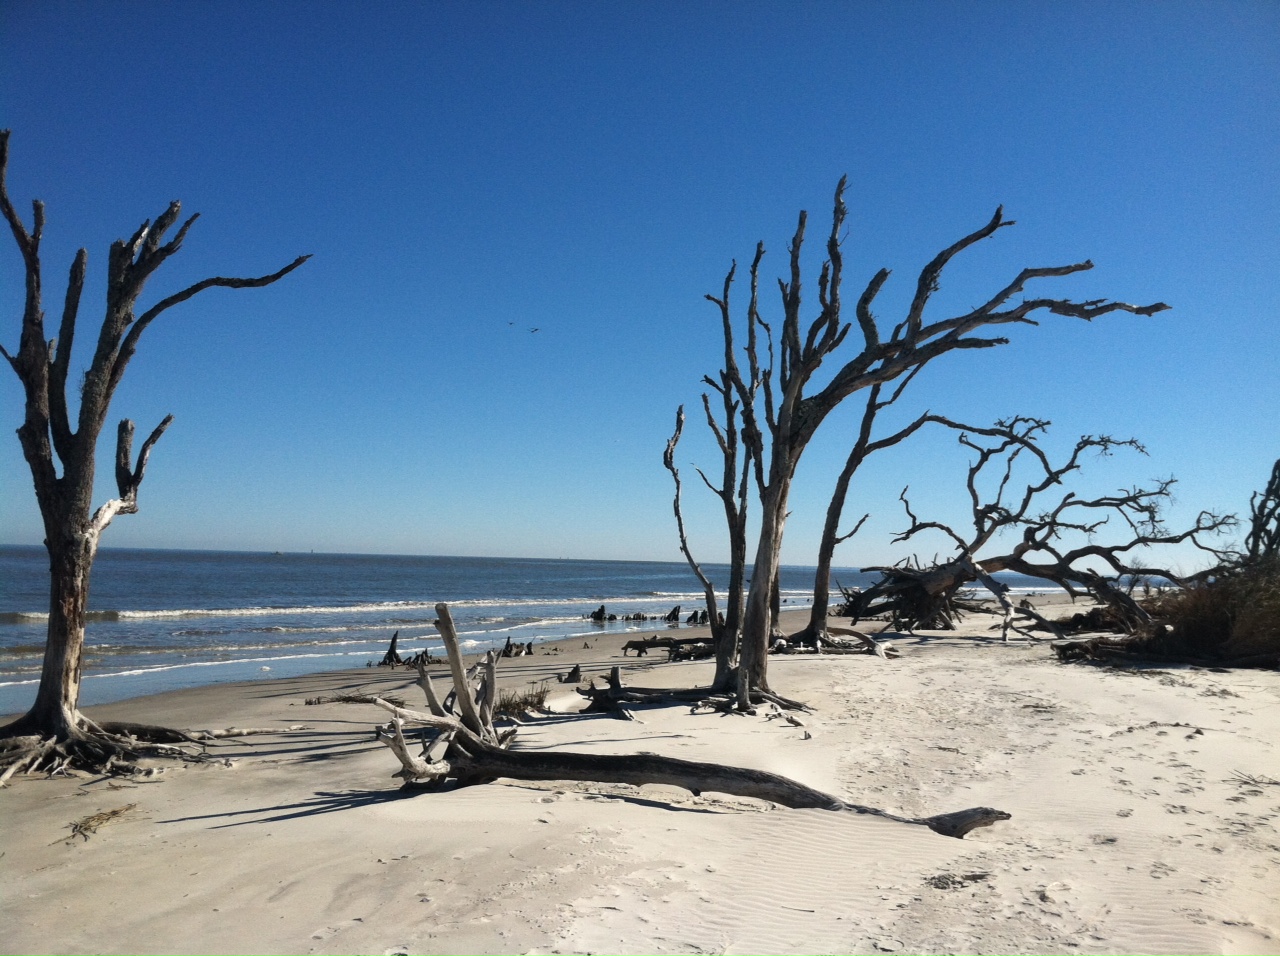 Driftwood Beach on Jekyll Island - Picture of the Week ~ The World of Deej